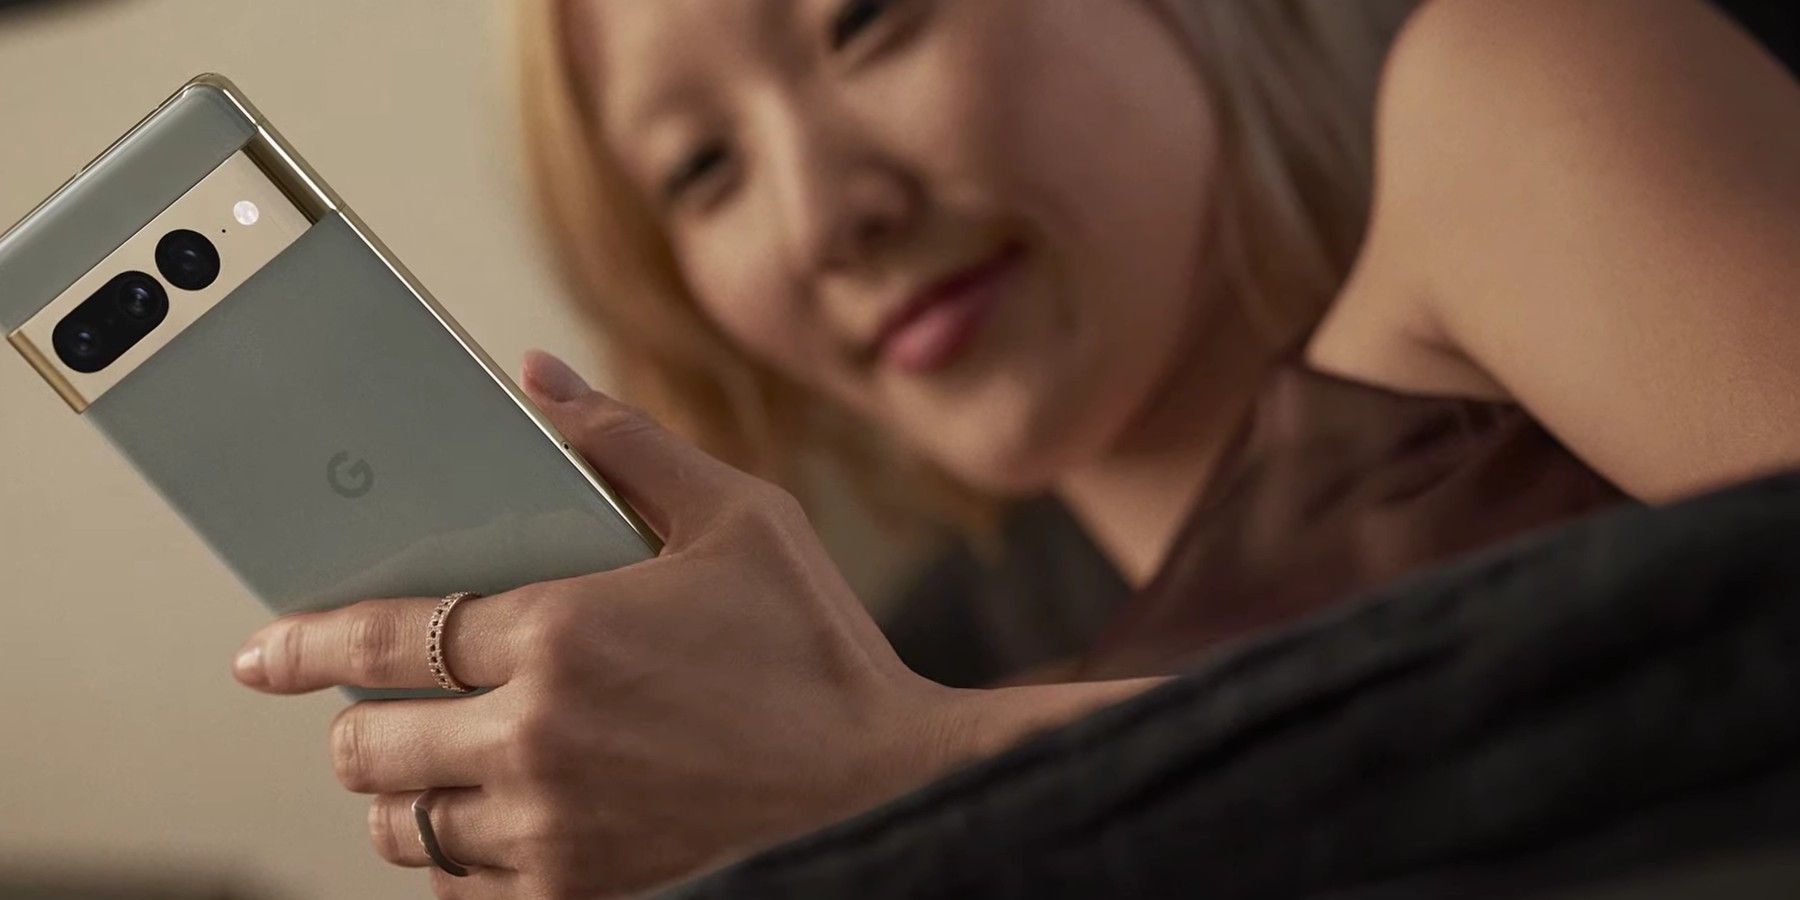 A blonde woman is pictured from below, holding a silver Pixel 7